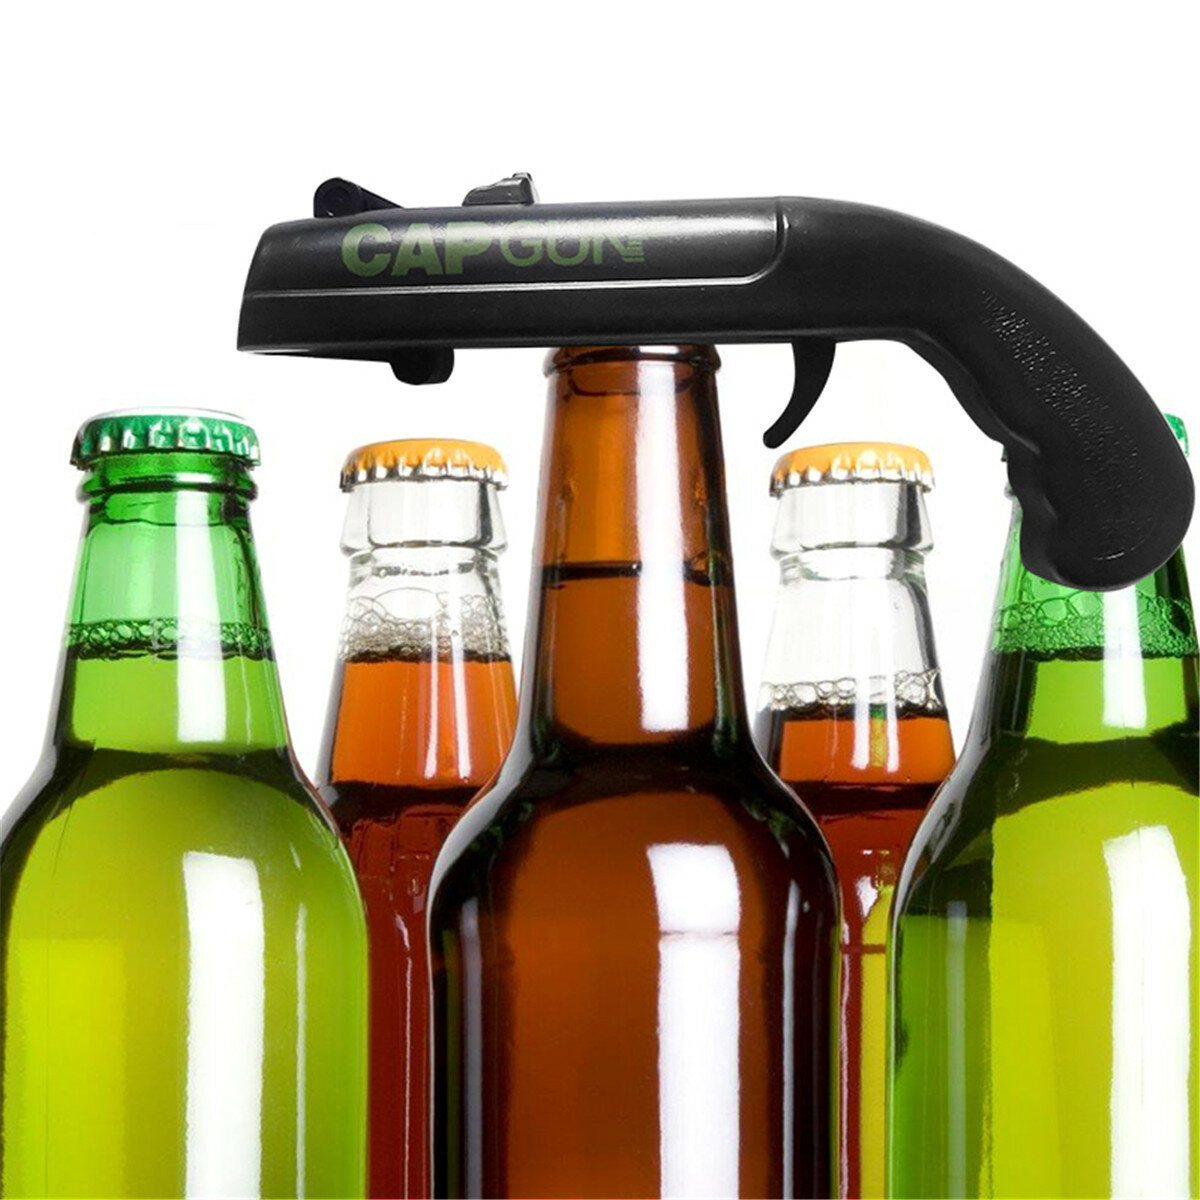 SAFETYON 3 Piece Cap, Bottle Opener, Launcher Tool, for Party Drinking Game Gift - Shoots Over 5 Met